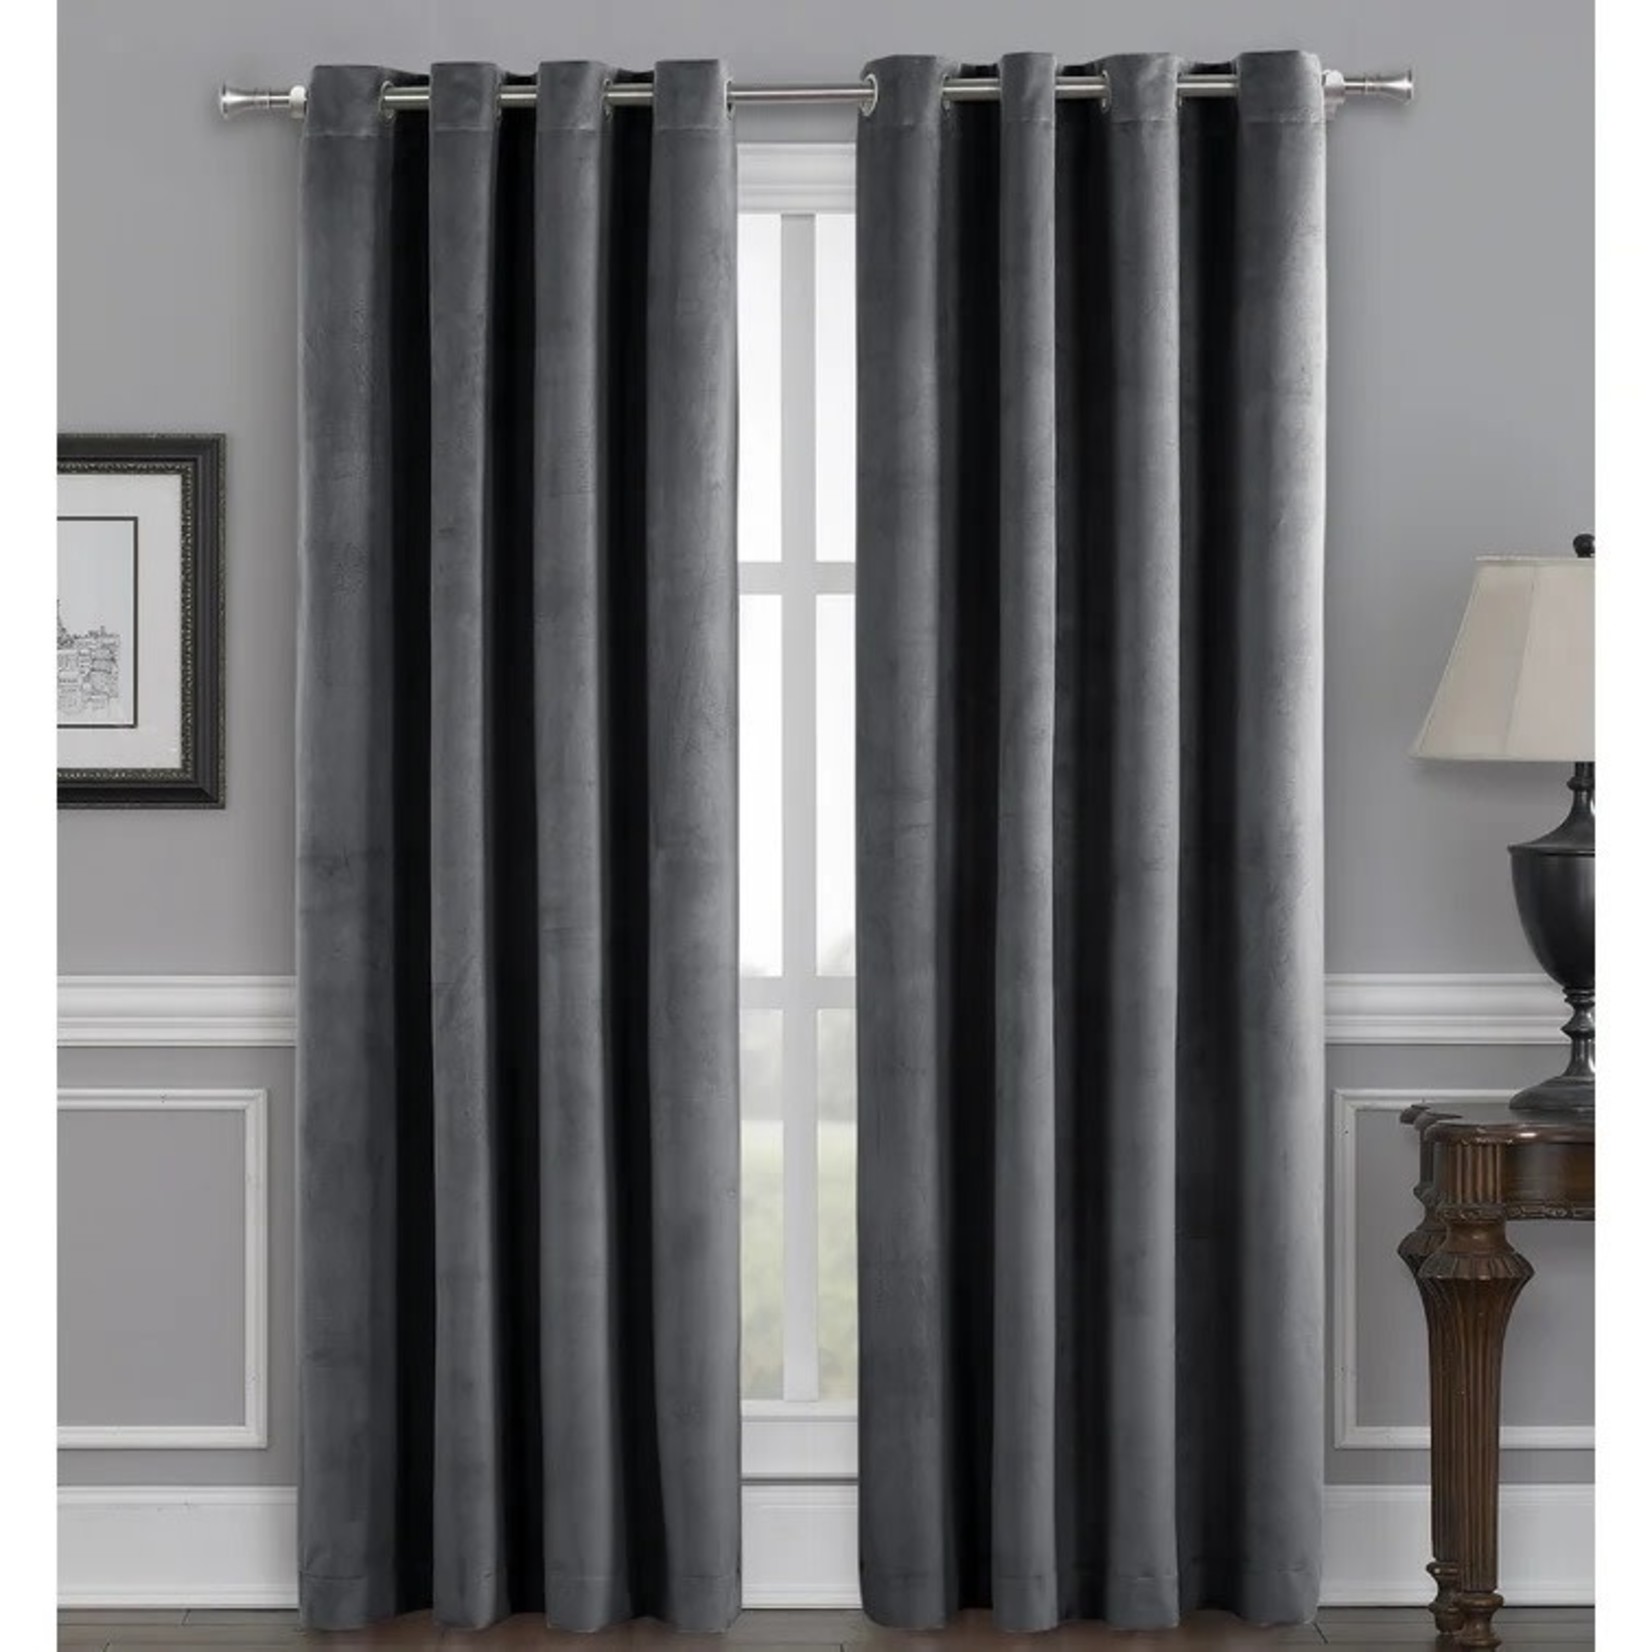 *52" x 84" Caasi Velvet Solid Max Blackout Thermal Grommet Curtain Panels - Set of 2 - Grey